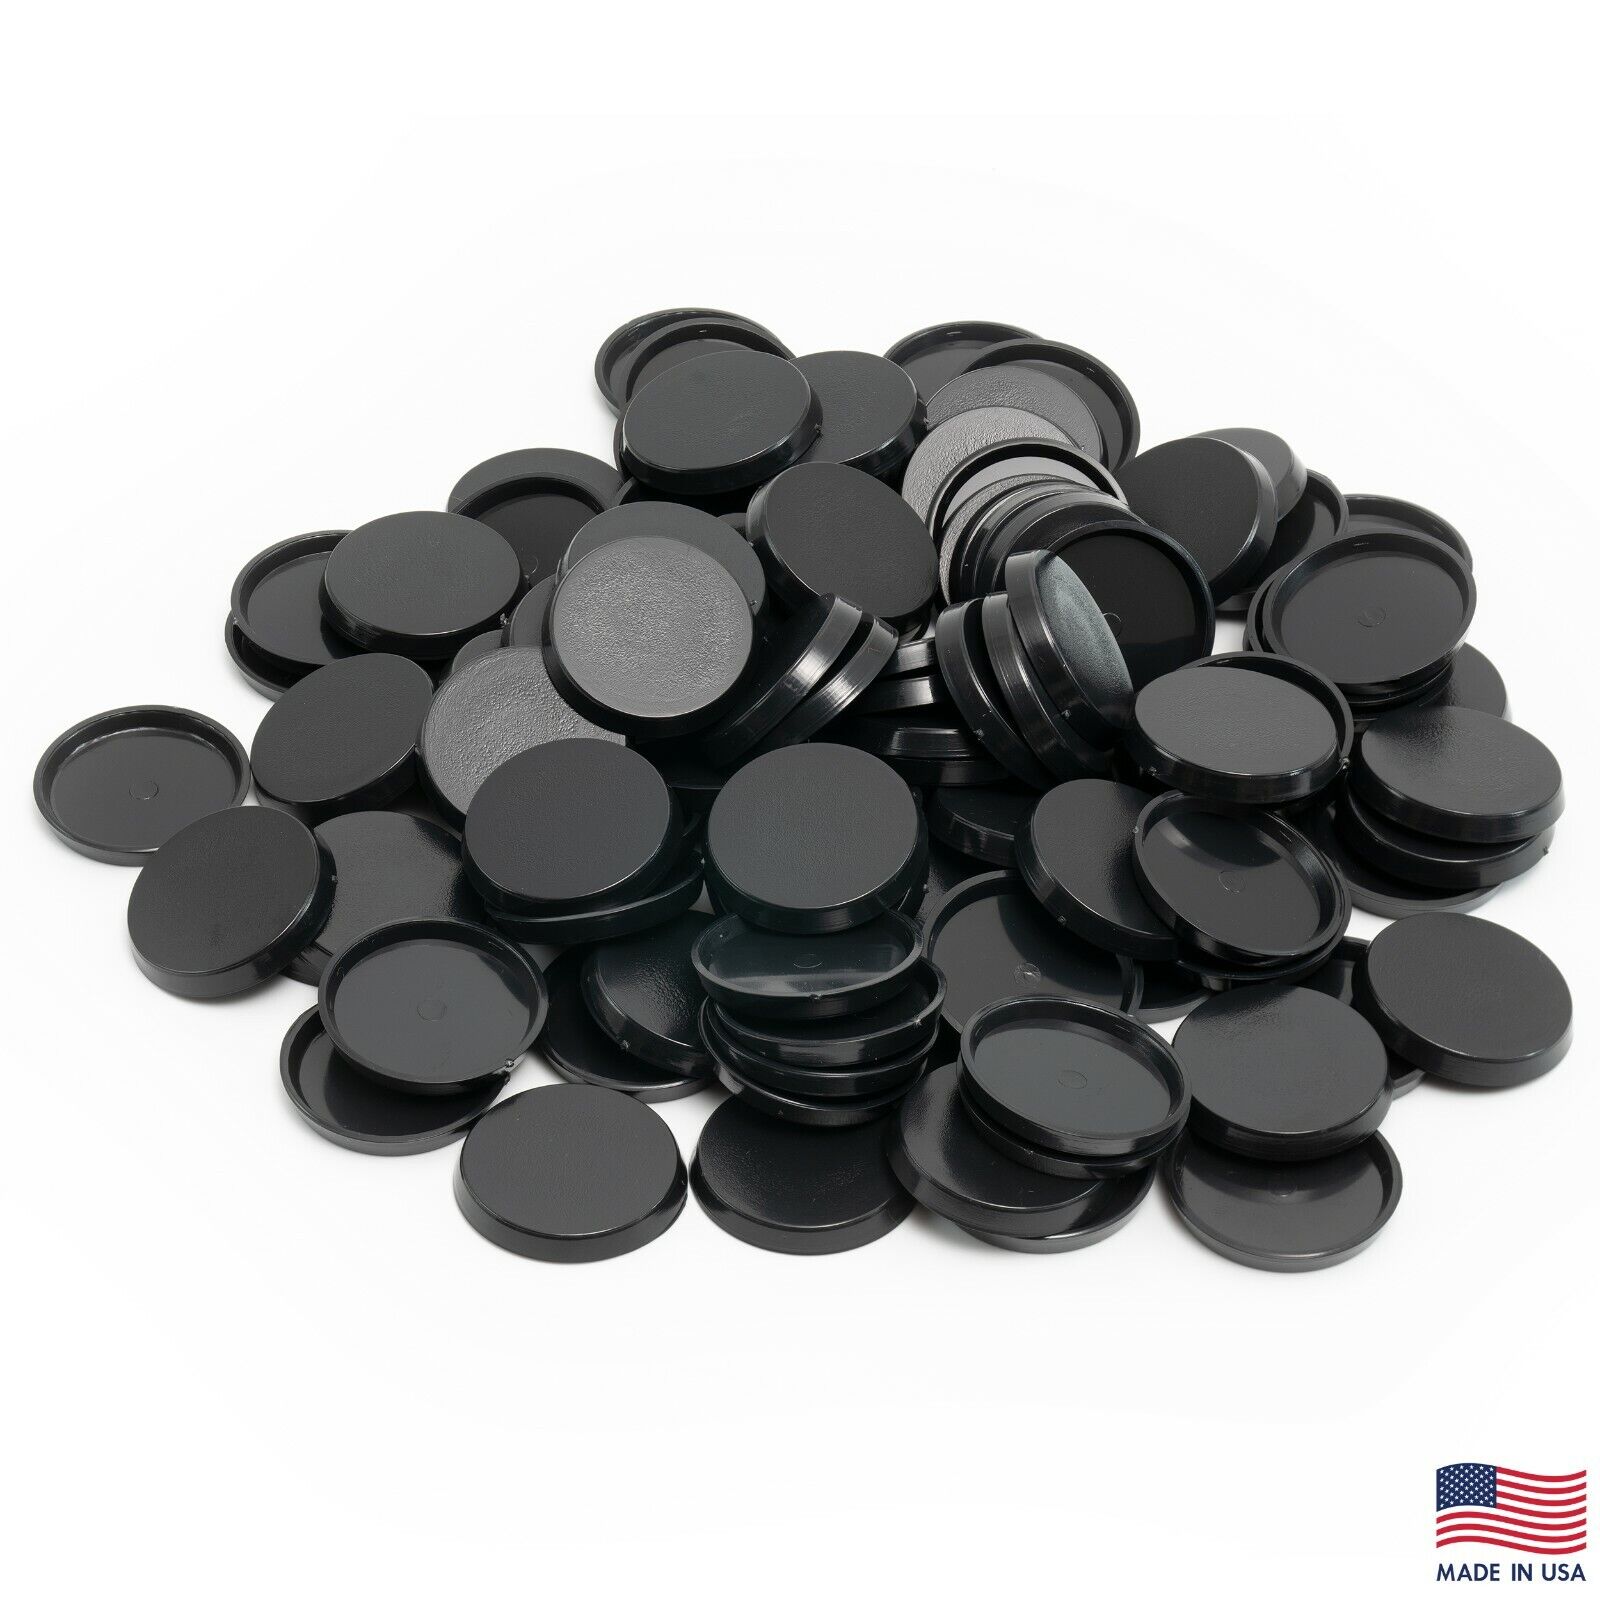 Pack of 100, 32 mm Plastic Round Bases Miniature Wargames Table Top gaming Unbranded